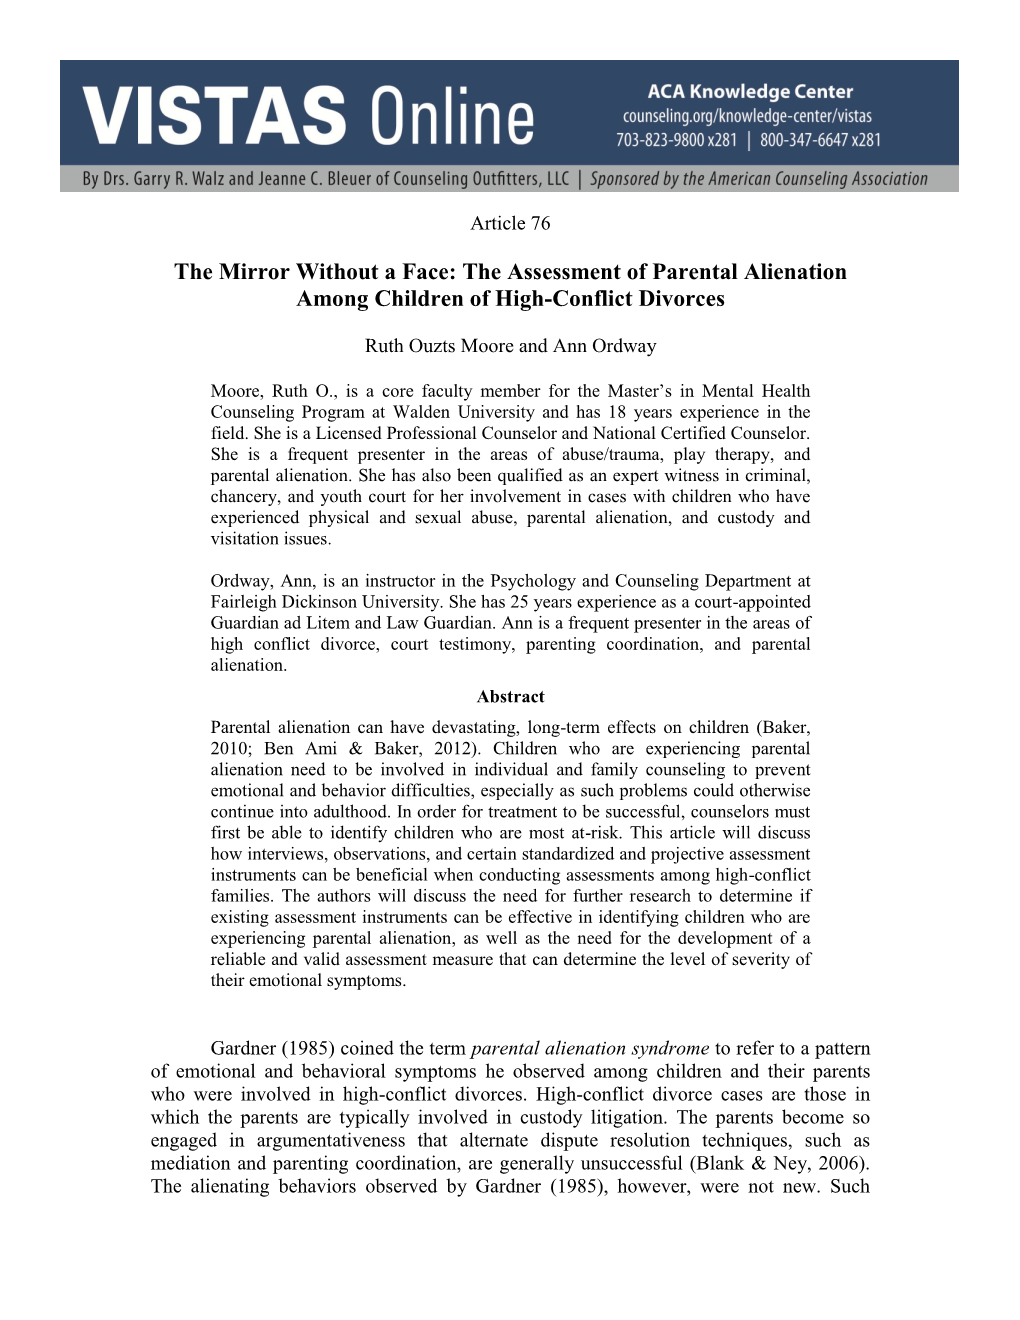 The Mirror Without a Face: the Assessment of Parental Alienation Among Children of High-Conflict Divorces